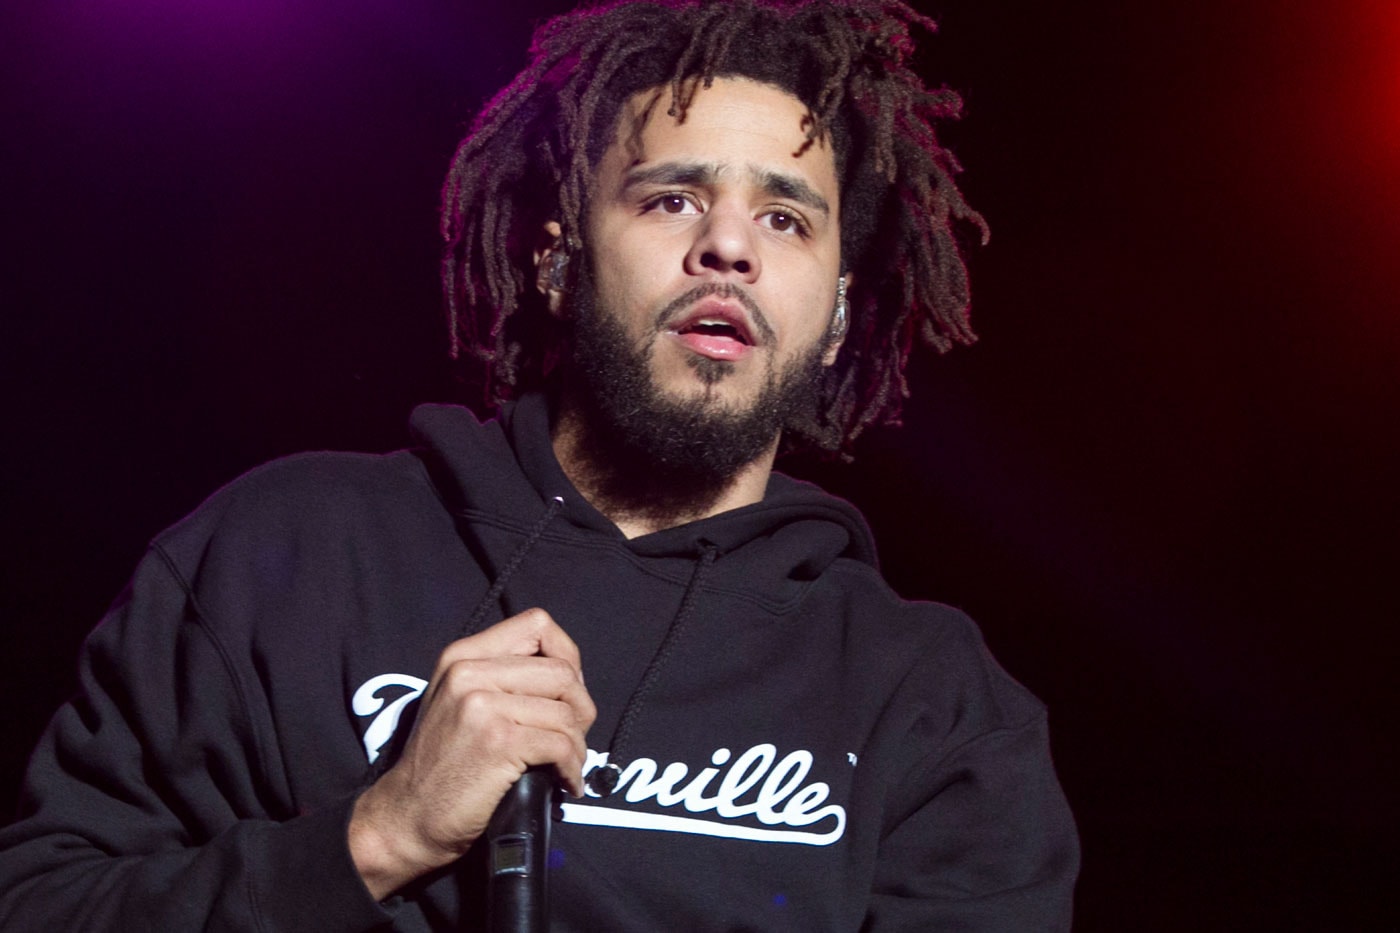 Lupe Fiasco Disses J. Cole over His "Everybody Dies" Beat Music Track